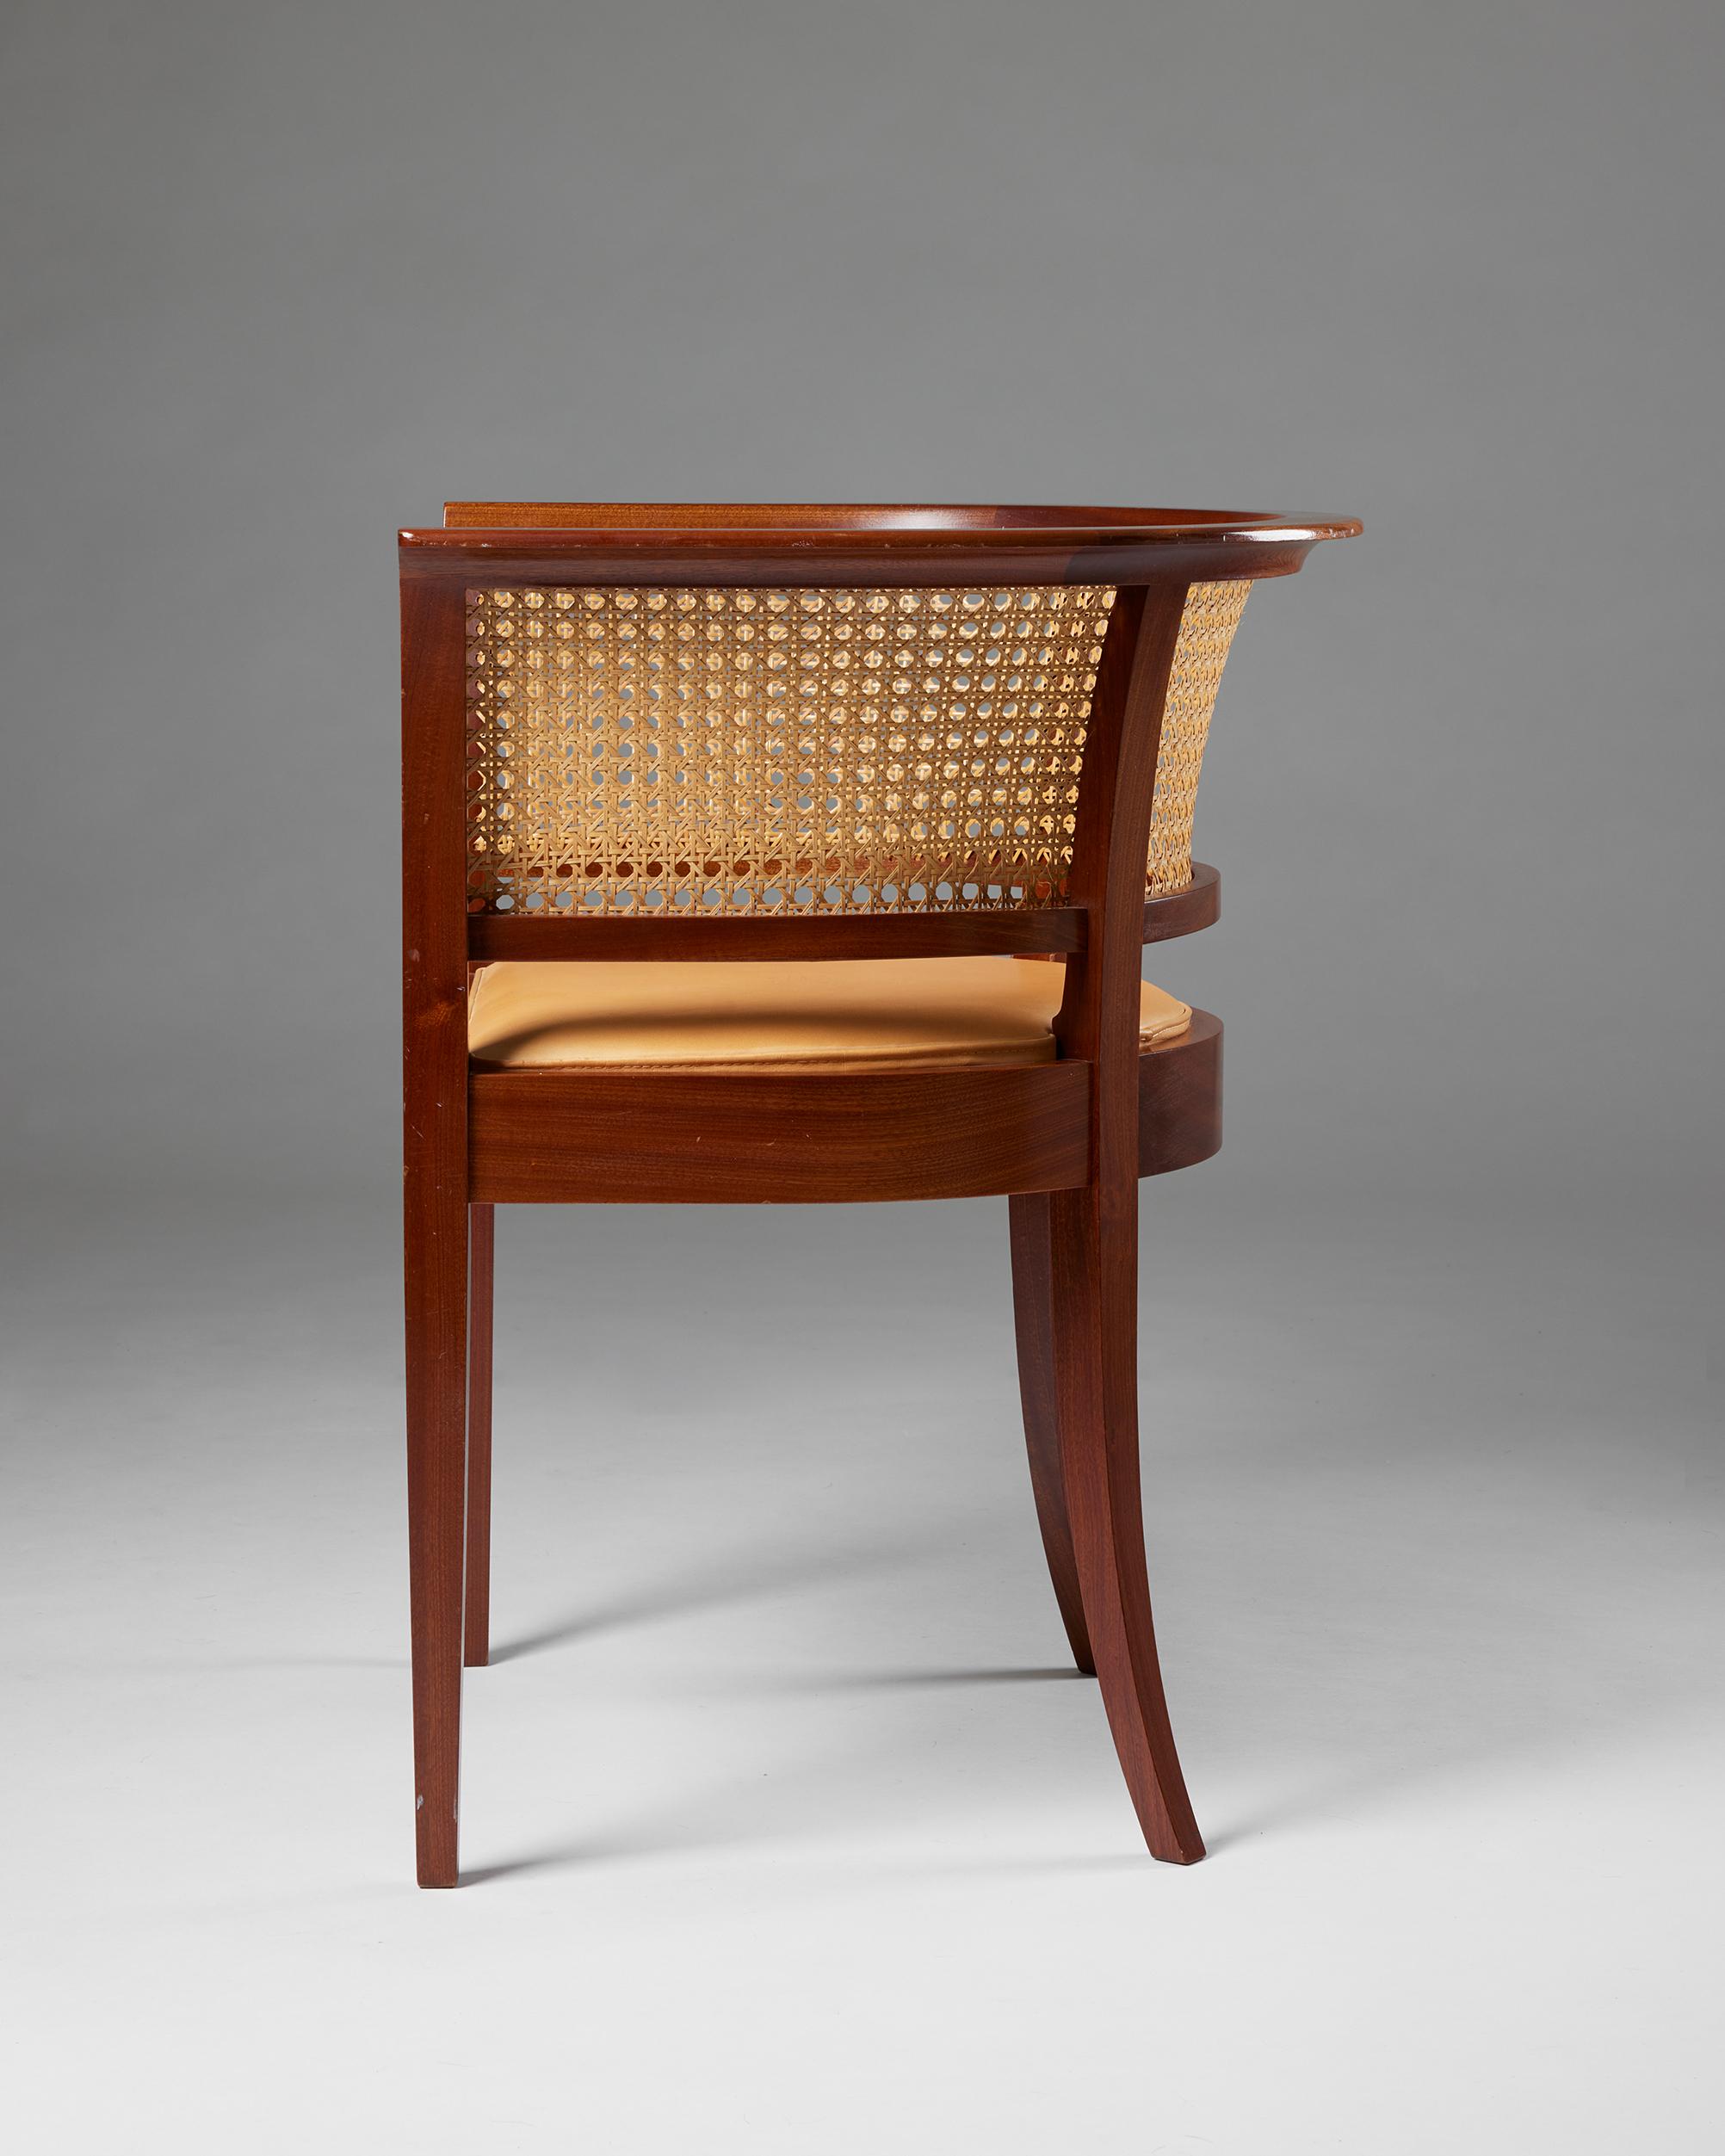 ‘The Faaborg Chair’ designed by Kaare Klint for Rud. Rasmussen Cabinetmakers  For Sale 1